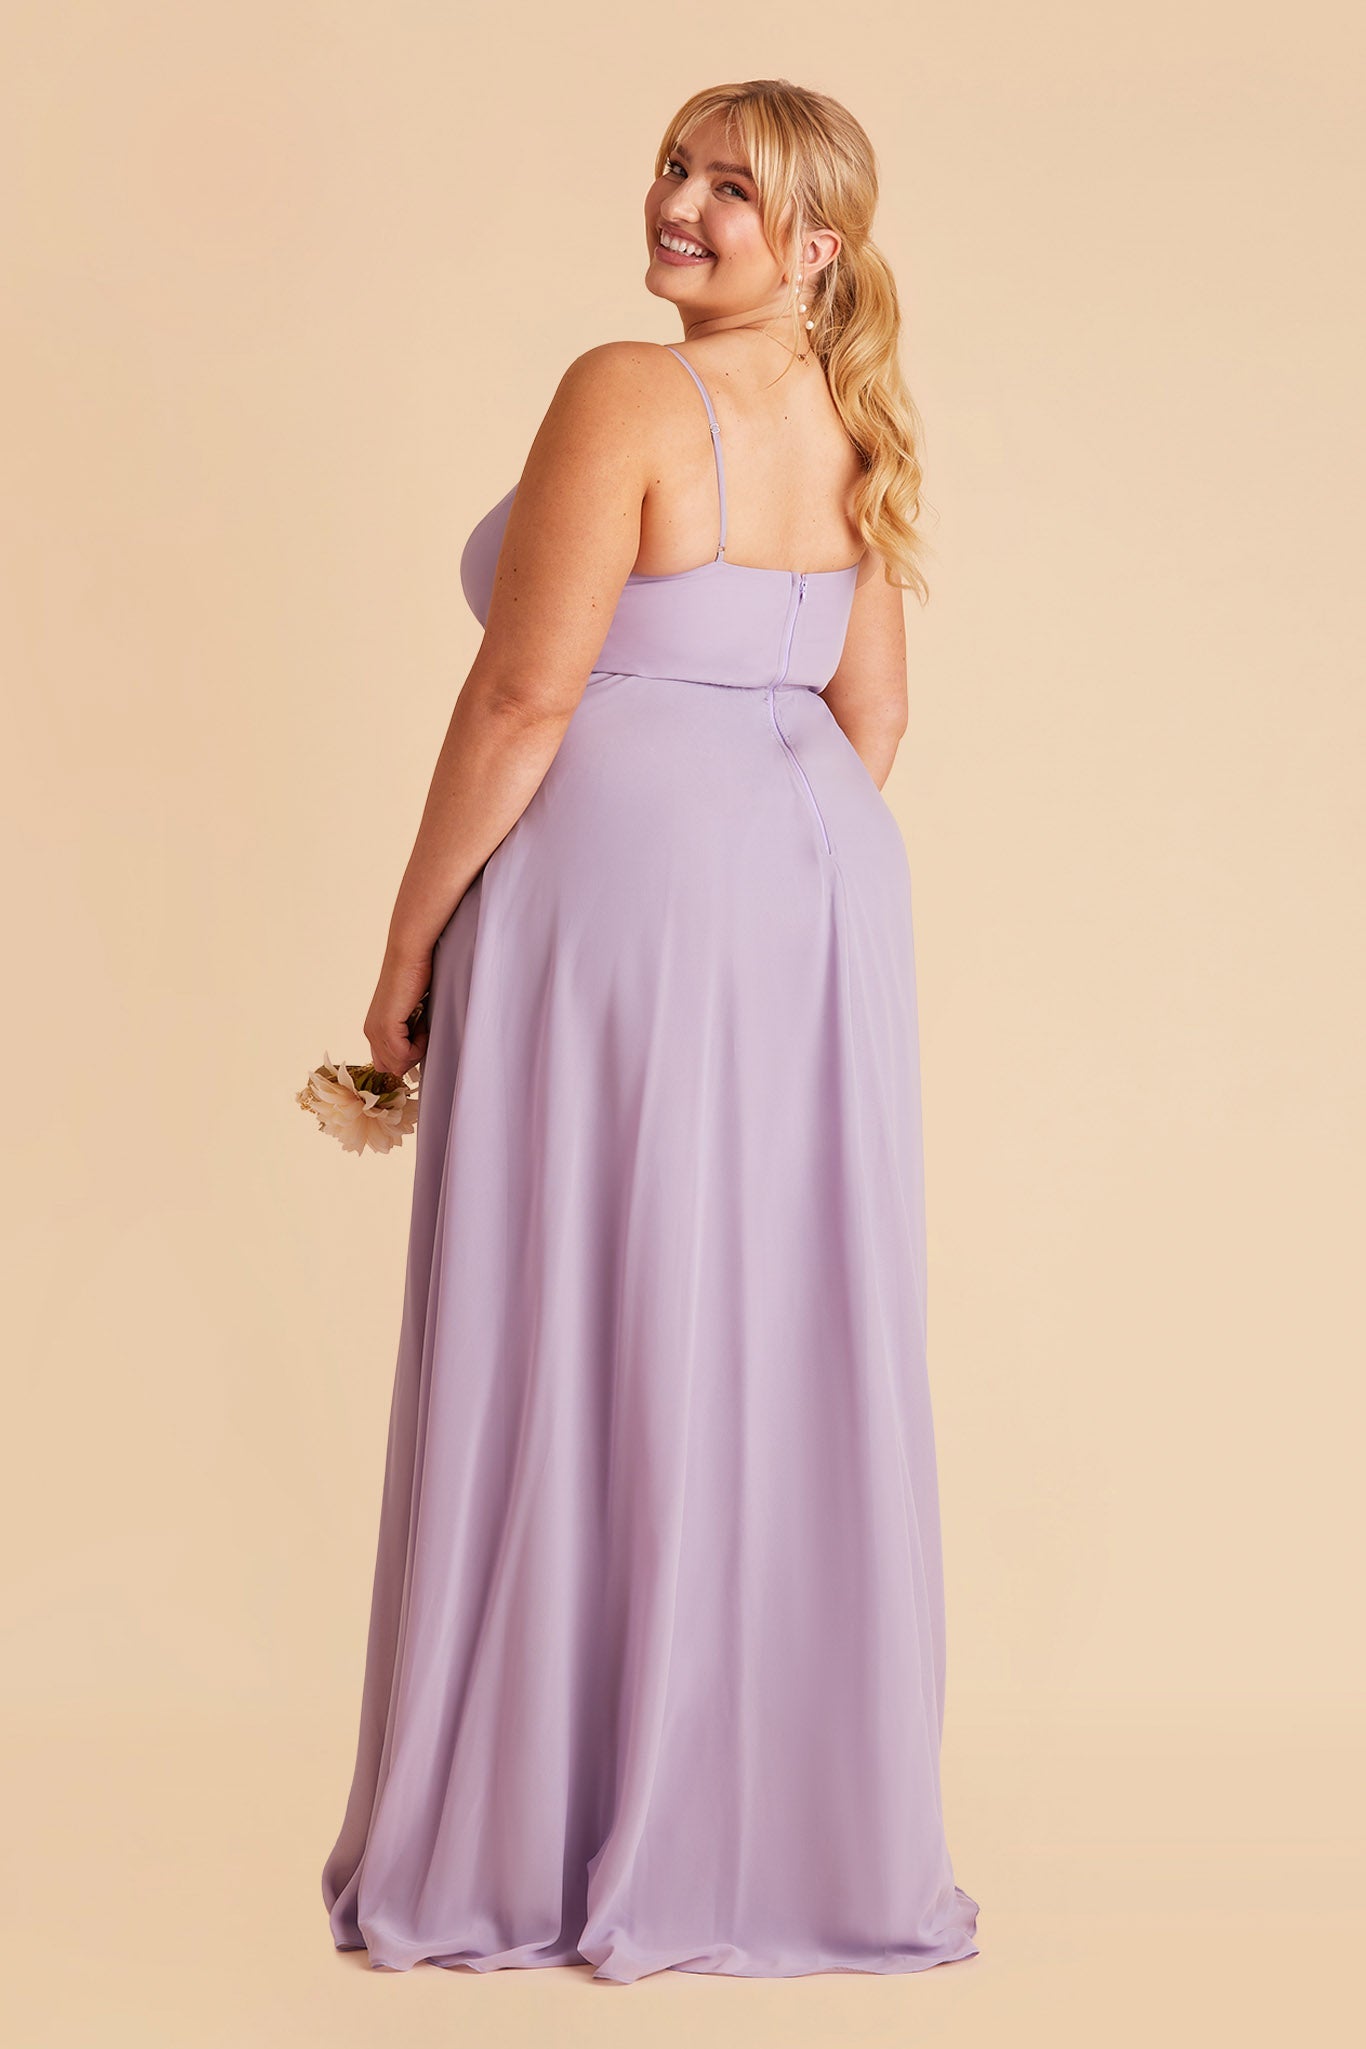 Kaia plus size bridesmaids dress in lavender chiffon by Birdy Grey, back view